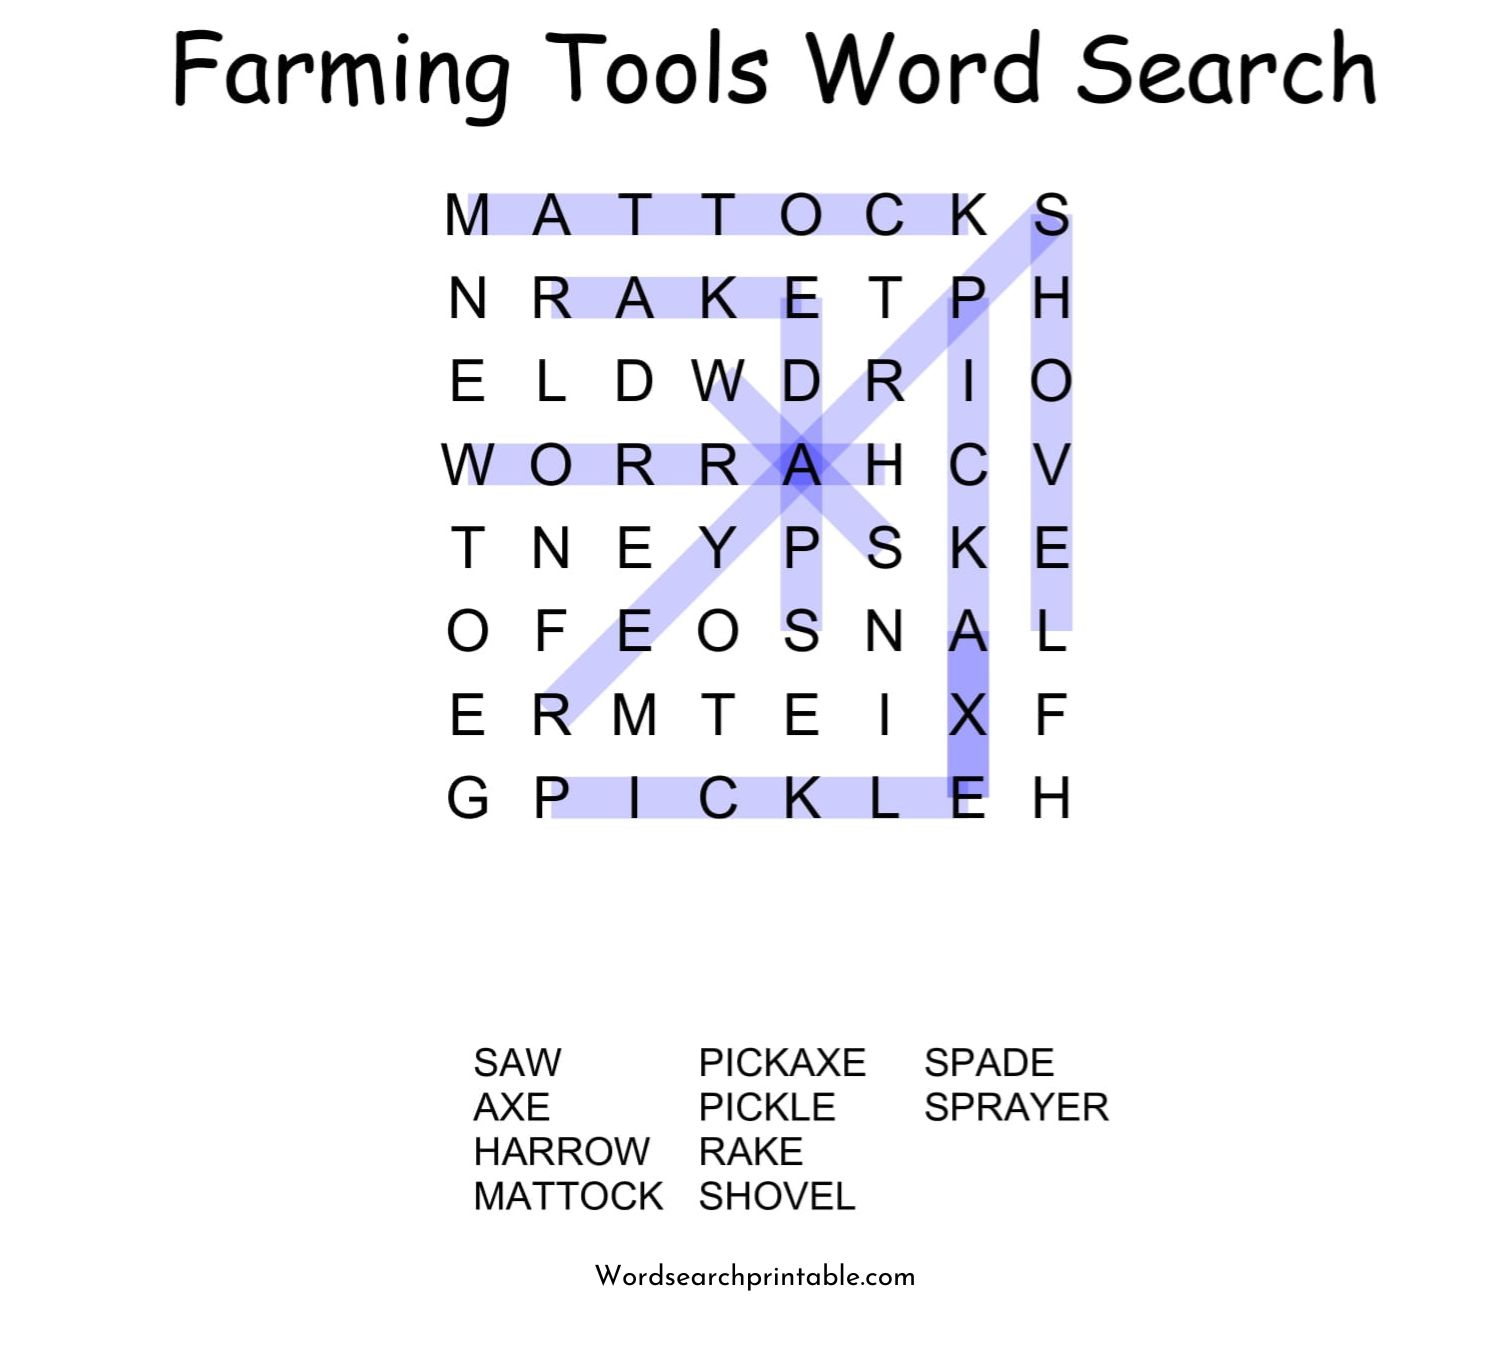 farming tools word search puzzle solution